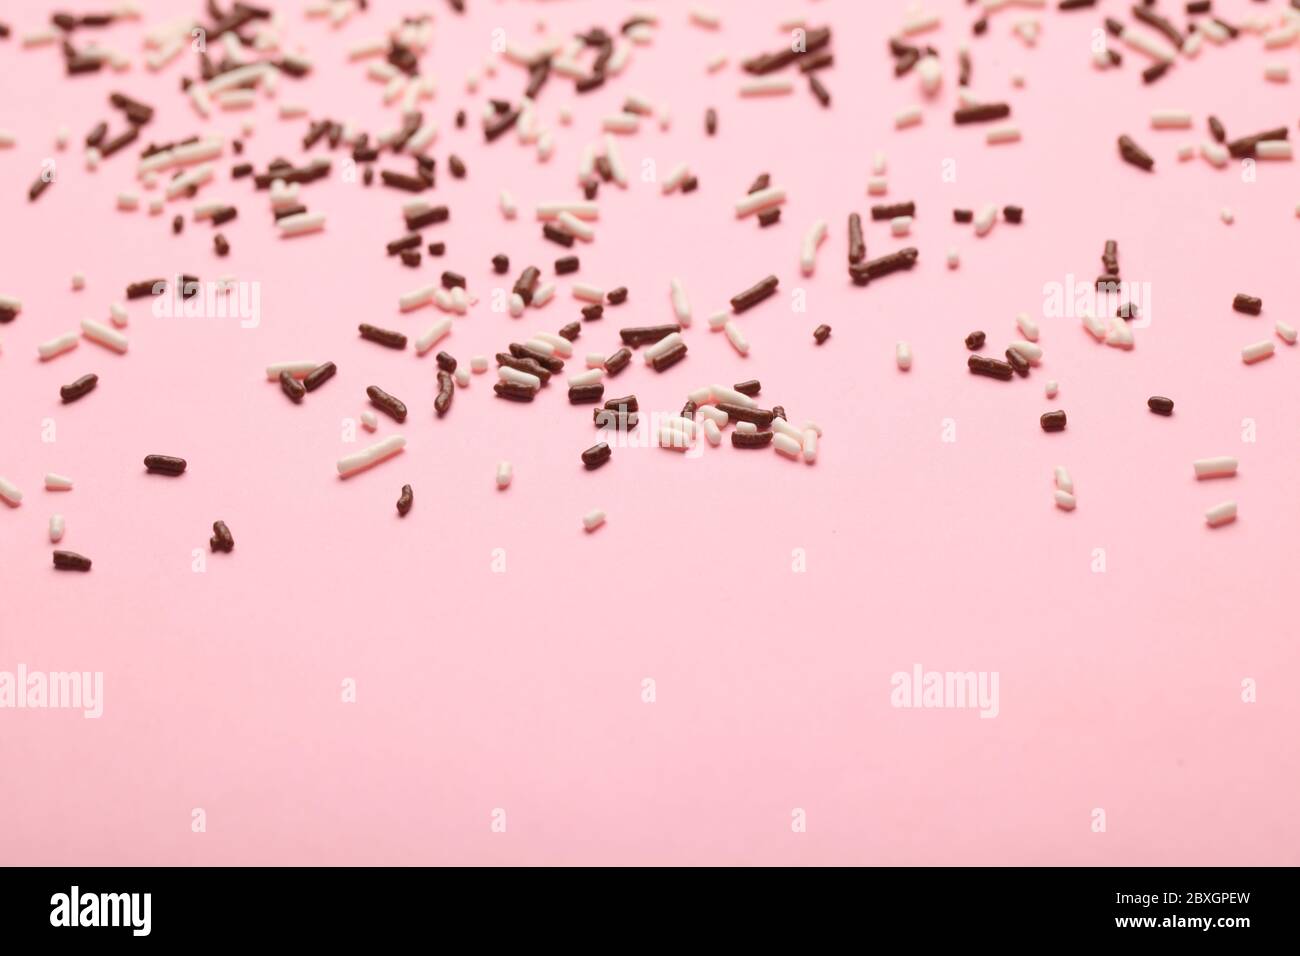 Abstract pink background with sprinkles Stock Photo